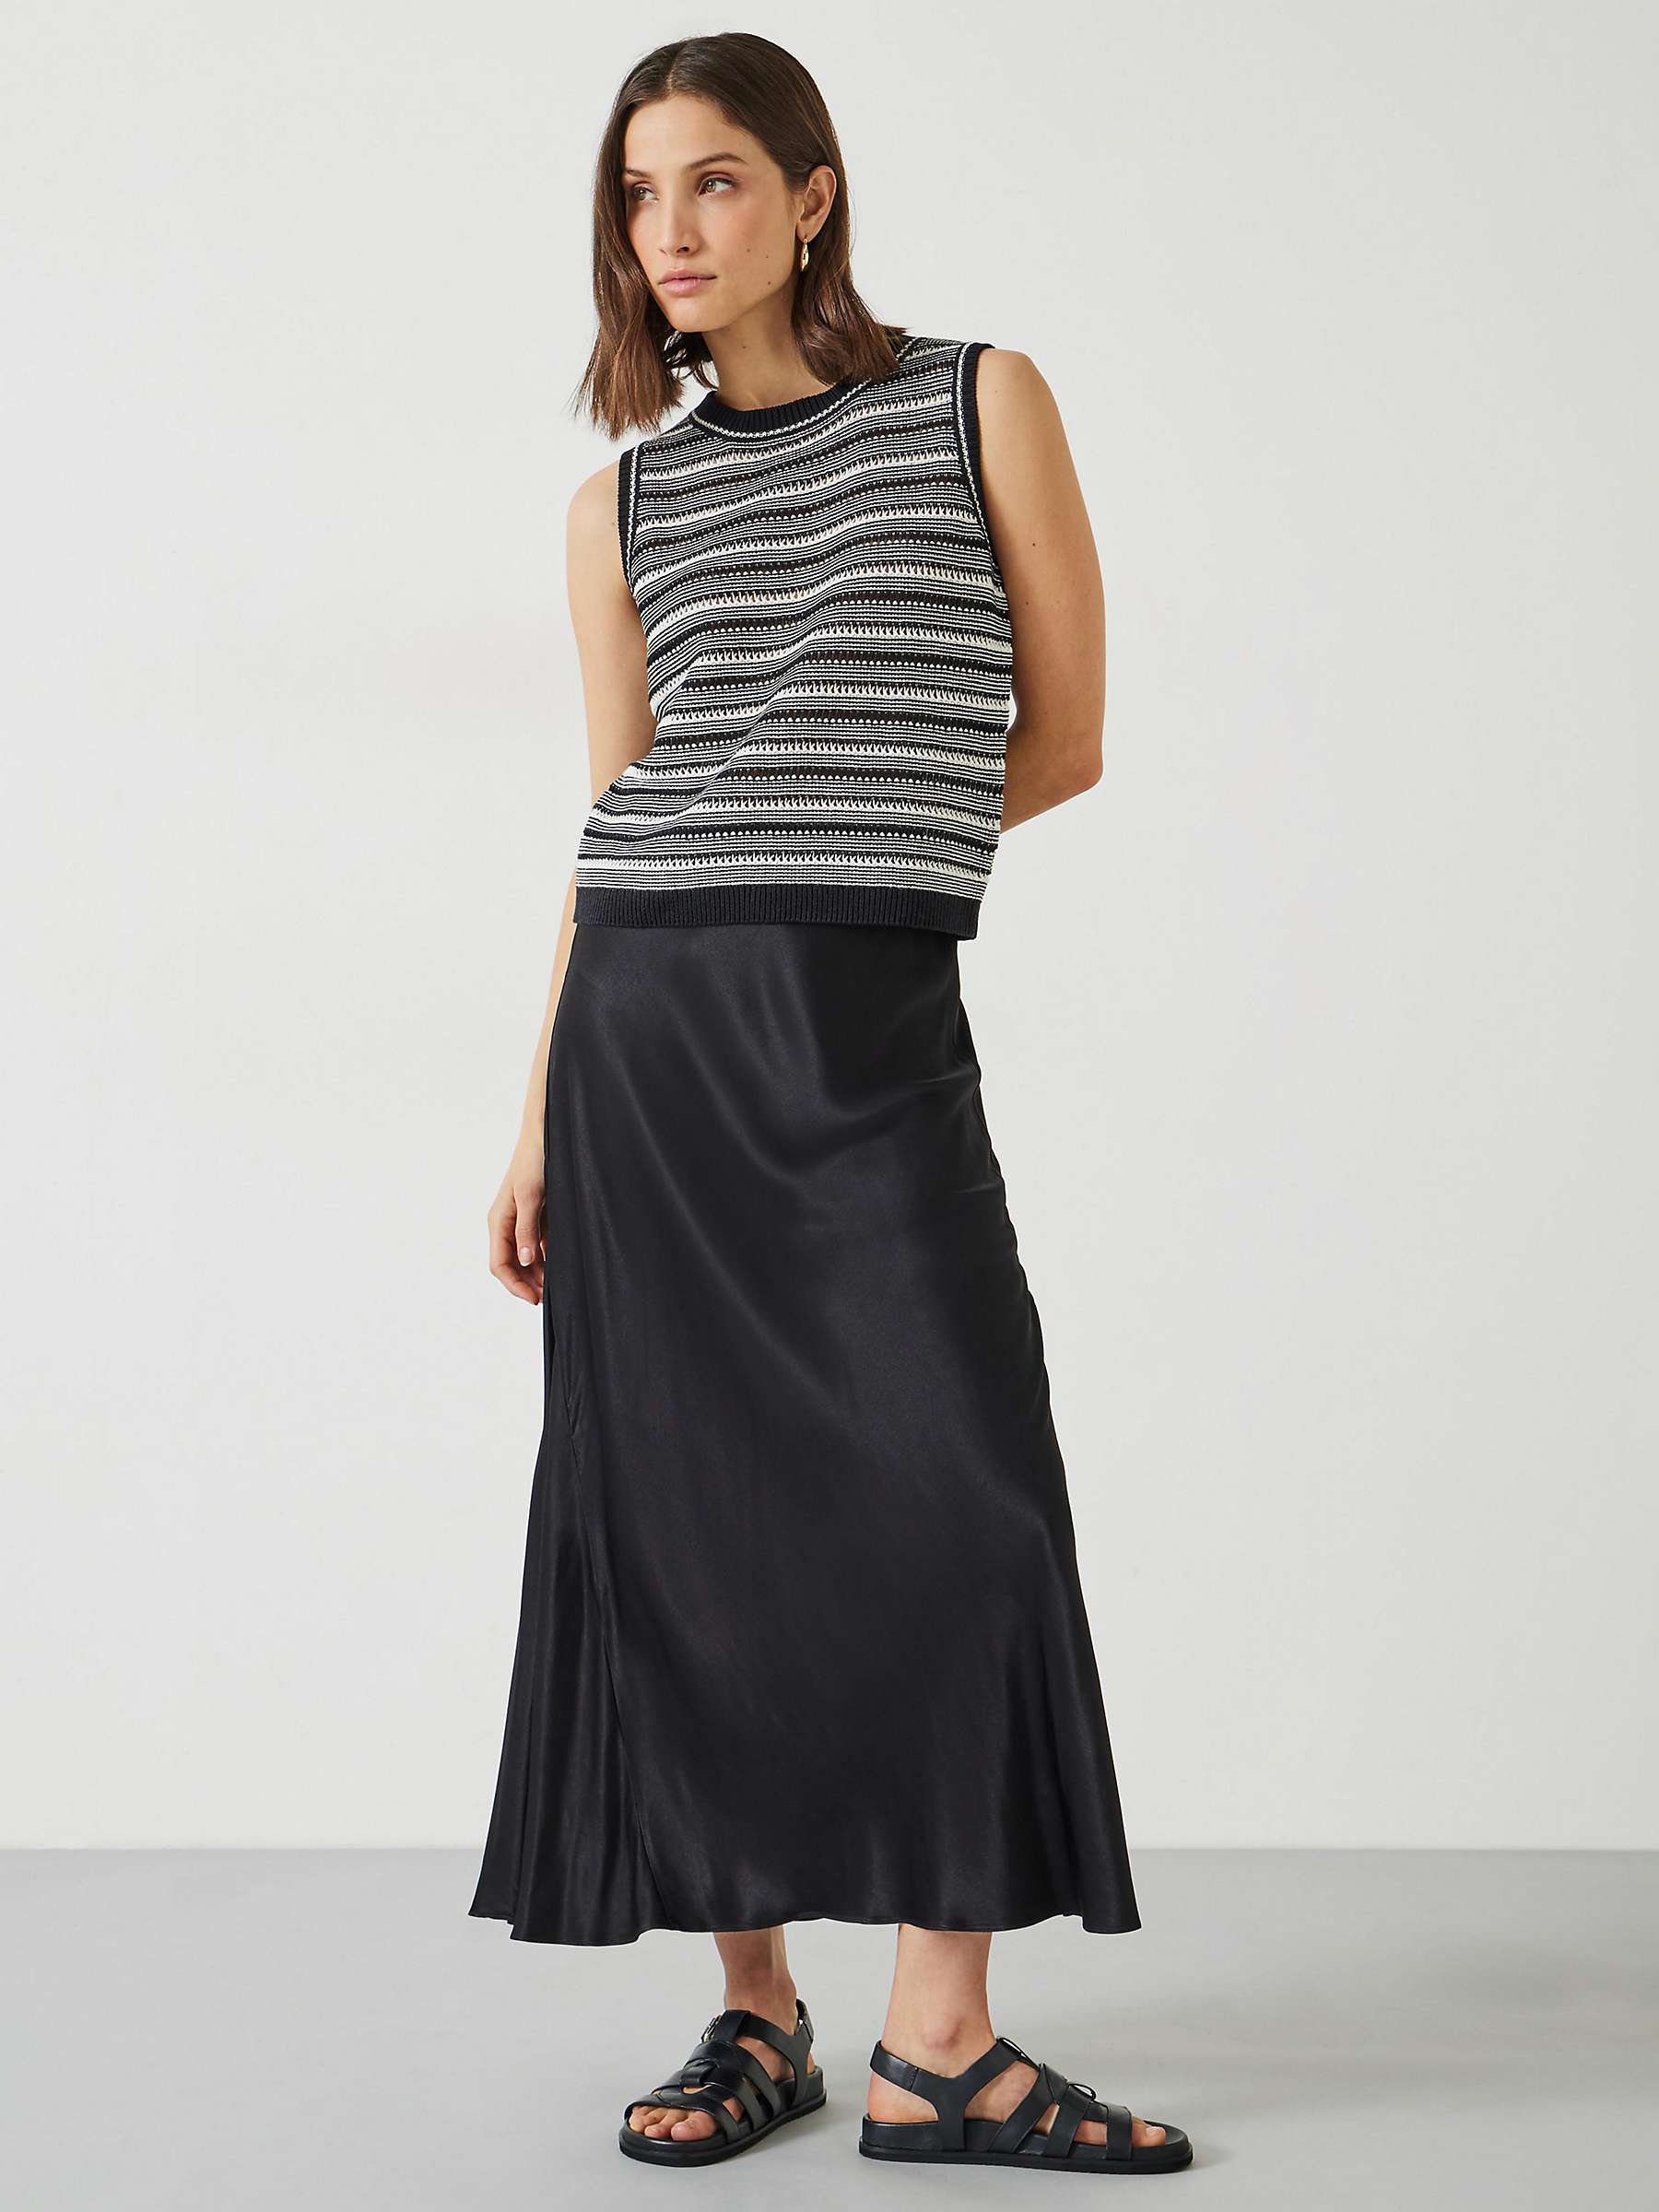 Buy HUSH Shannon Textured Knitted Tank Top, Black/Soft White Online at johnlewis.com